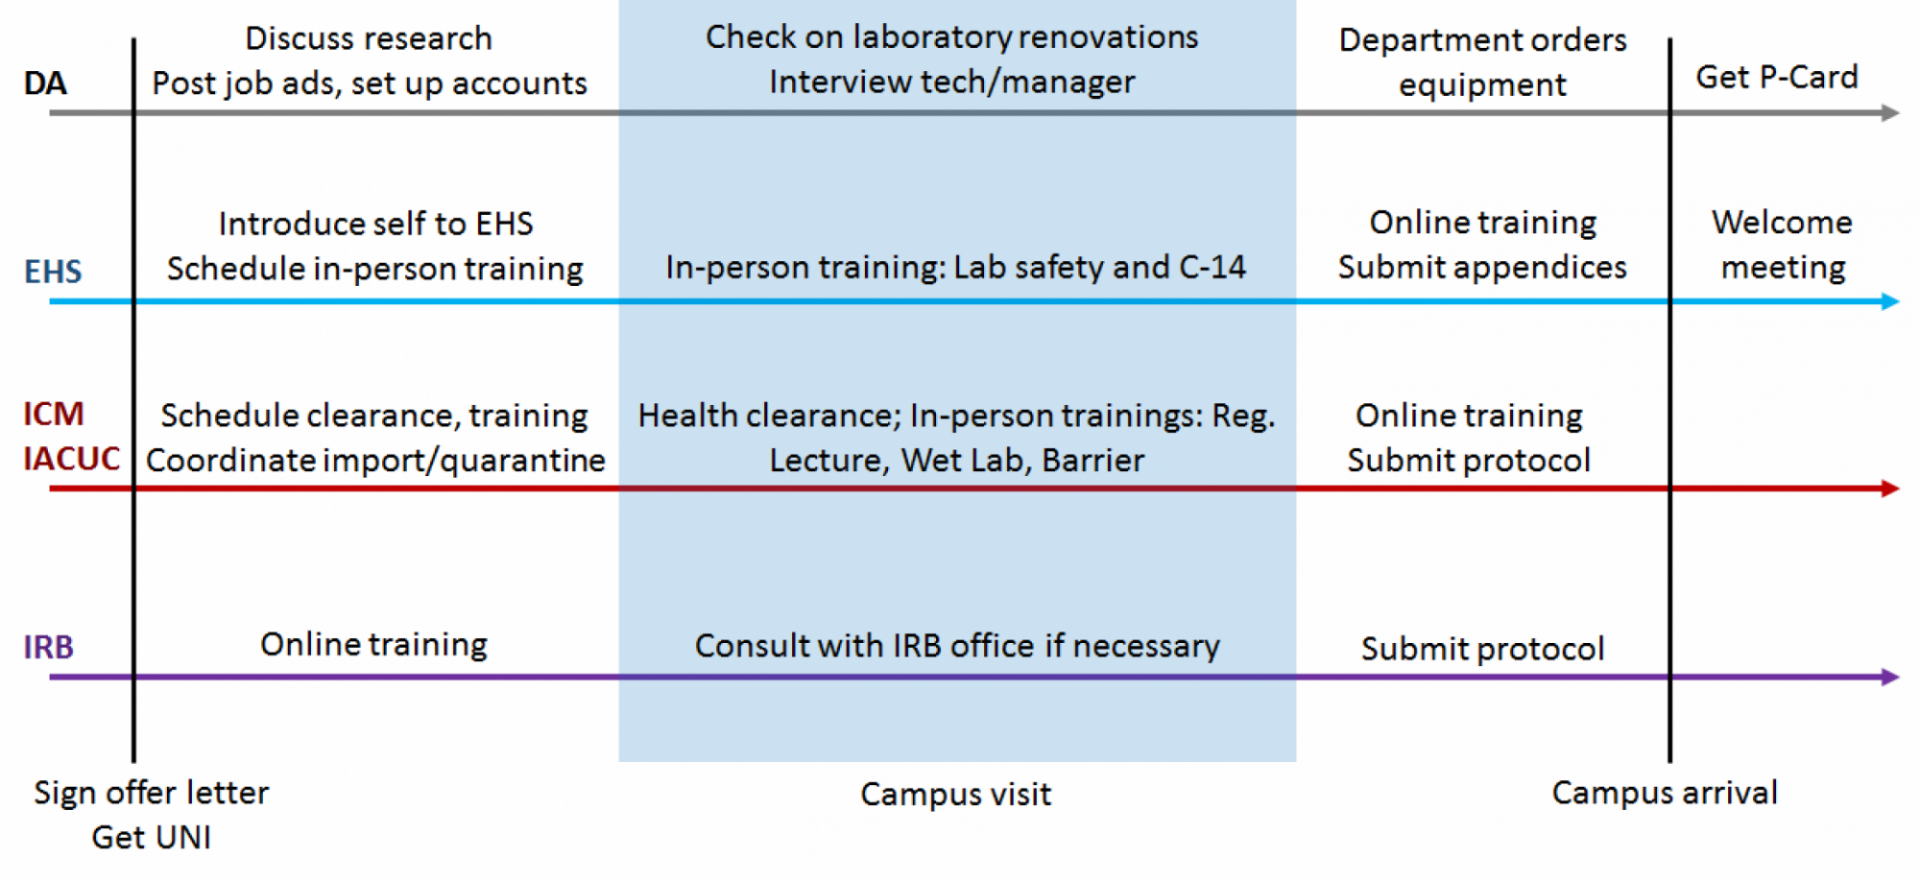 Timeline of events needed to set up your lab. Each item is discussed in the following paragraphs.